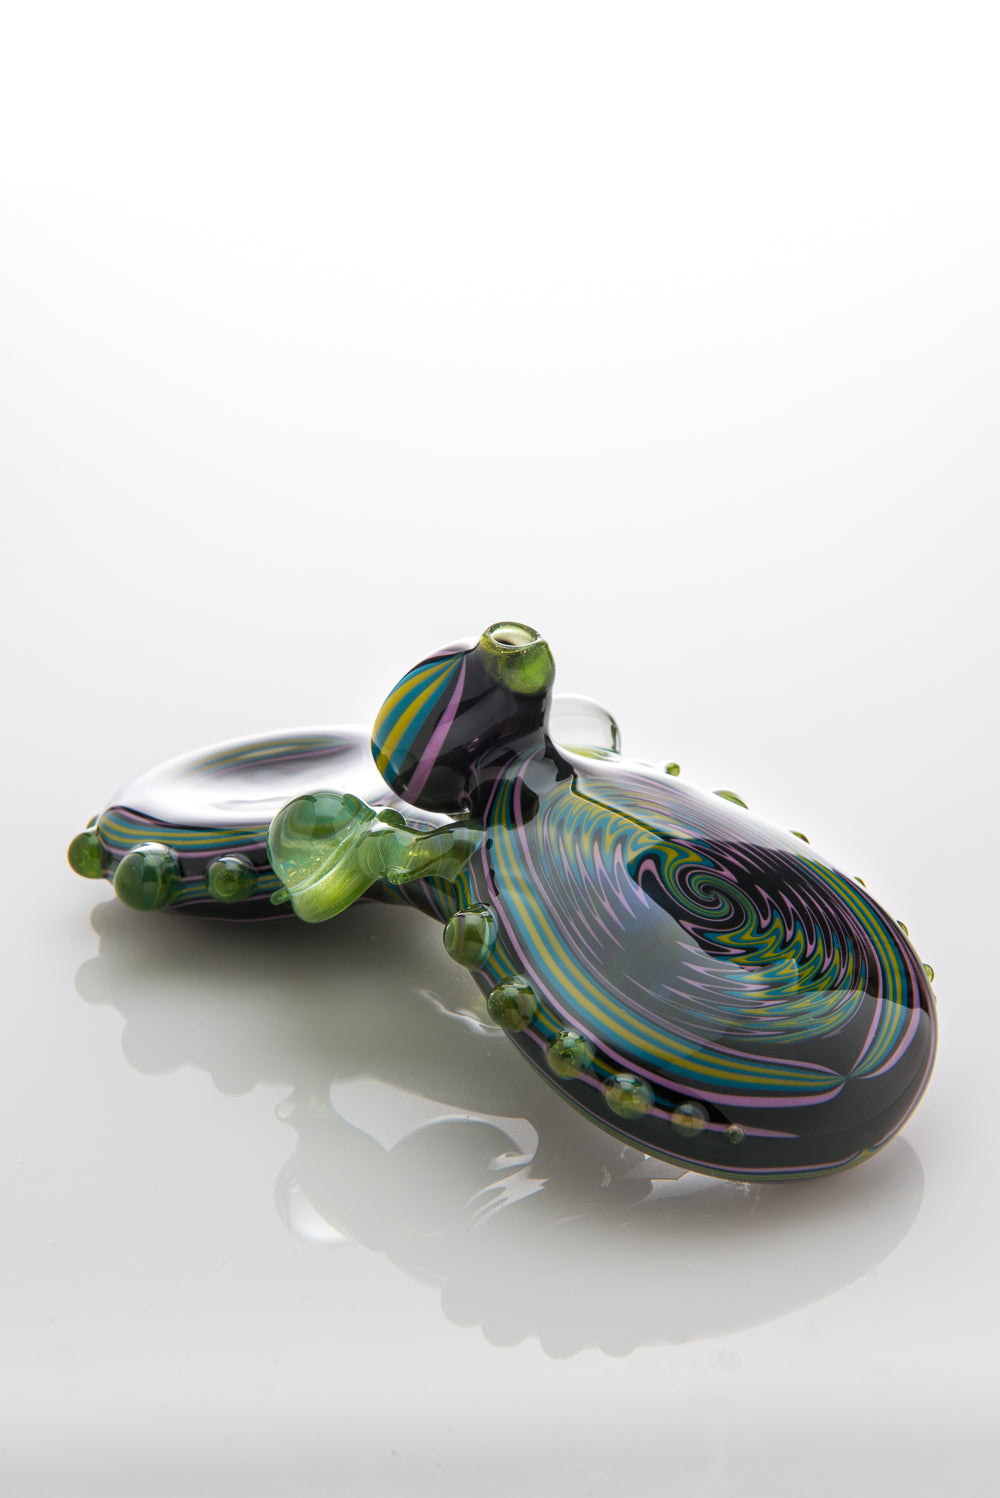 Double Reversals Pod with Marbles by WJC